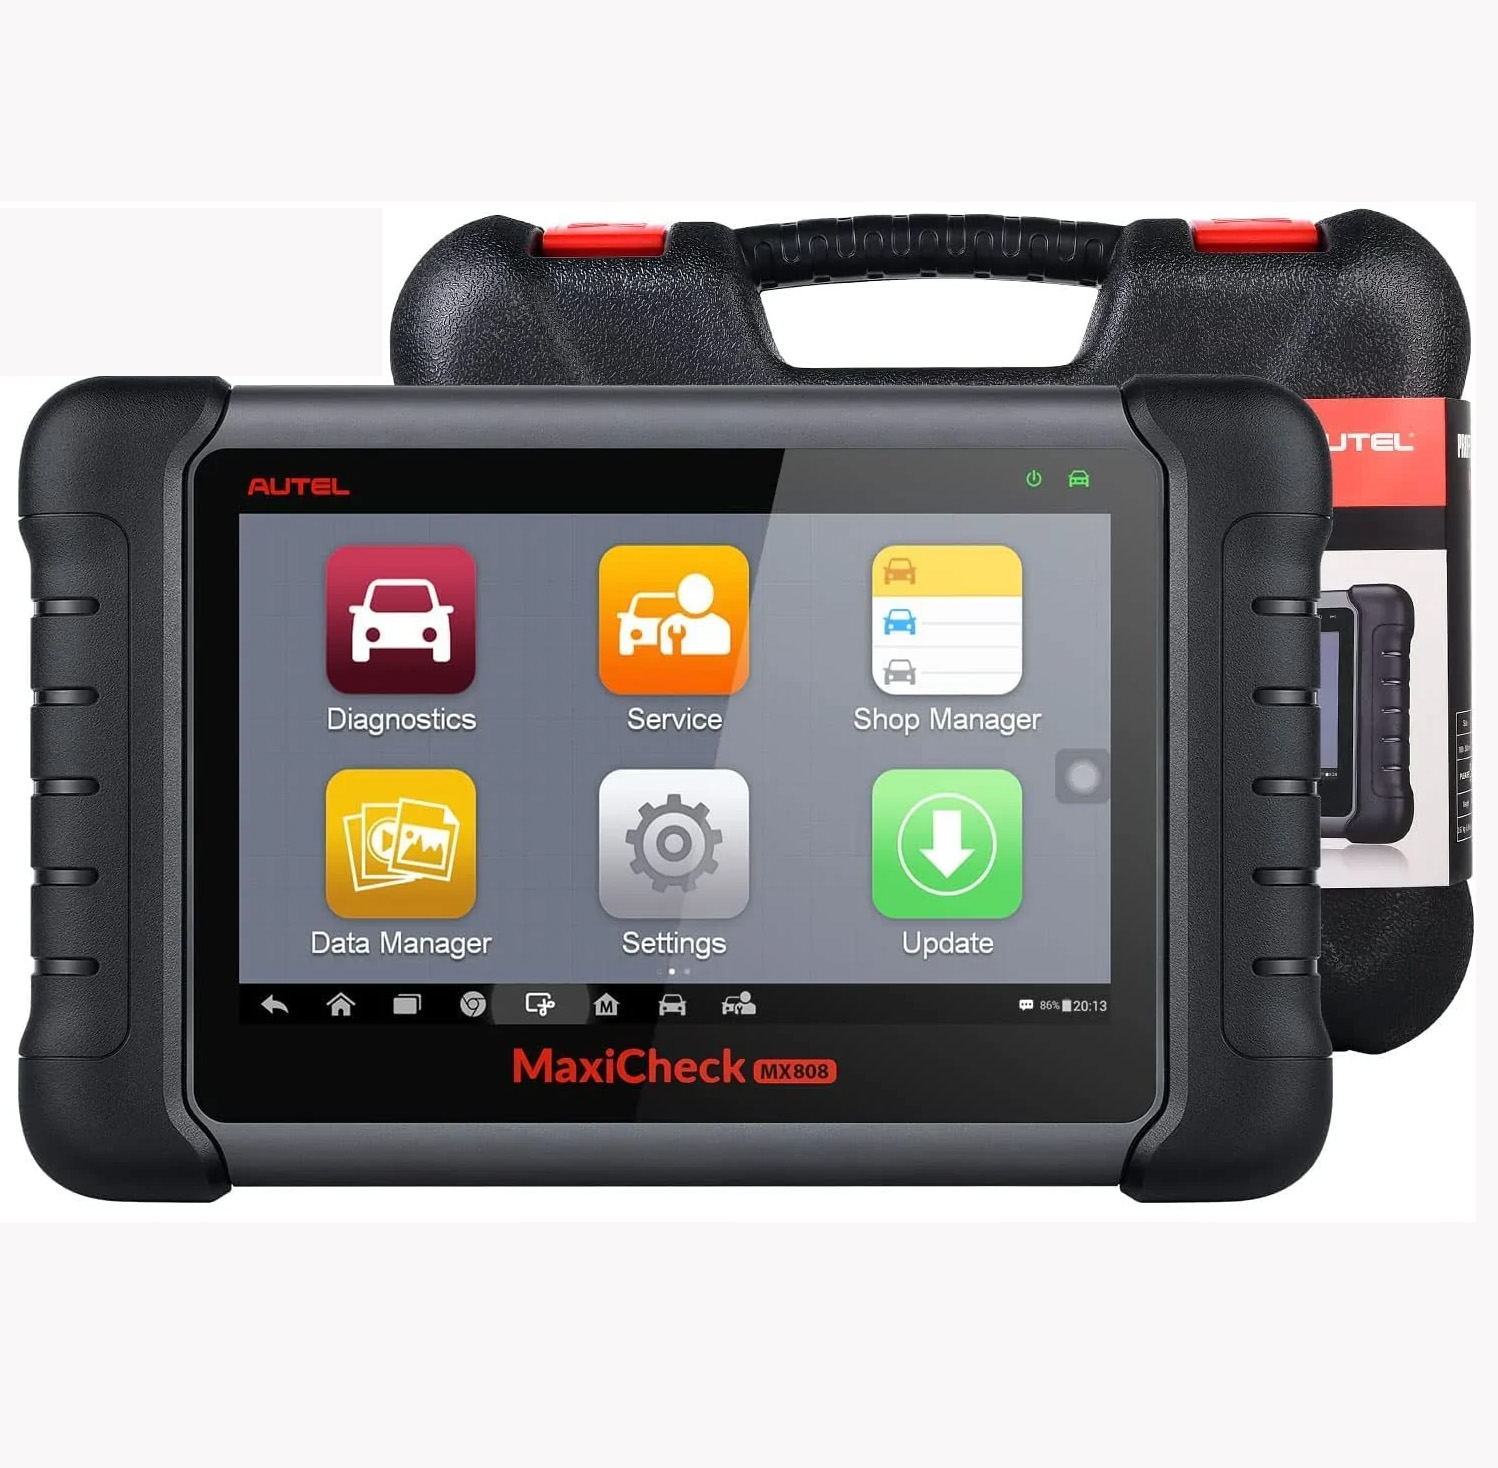 Autel MaxiCheck MX808 Full System Diagnostic Tool Newly Adds